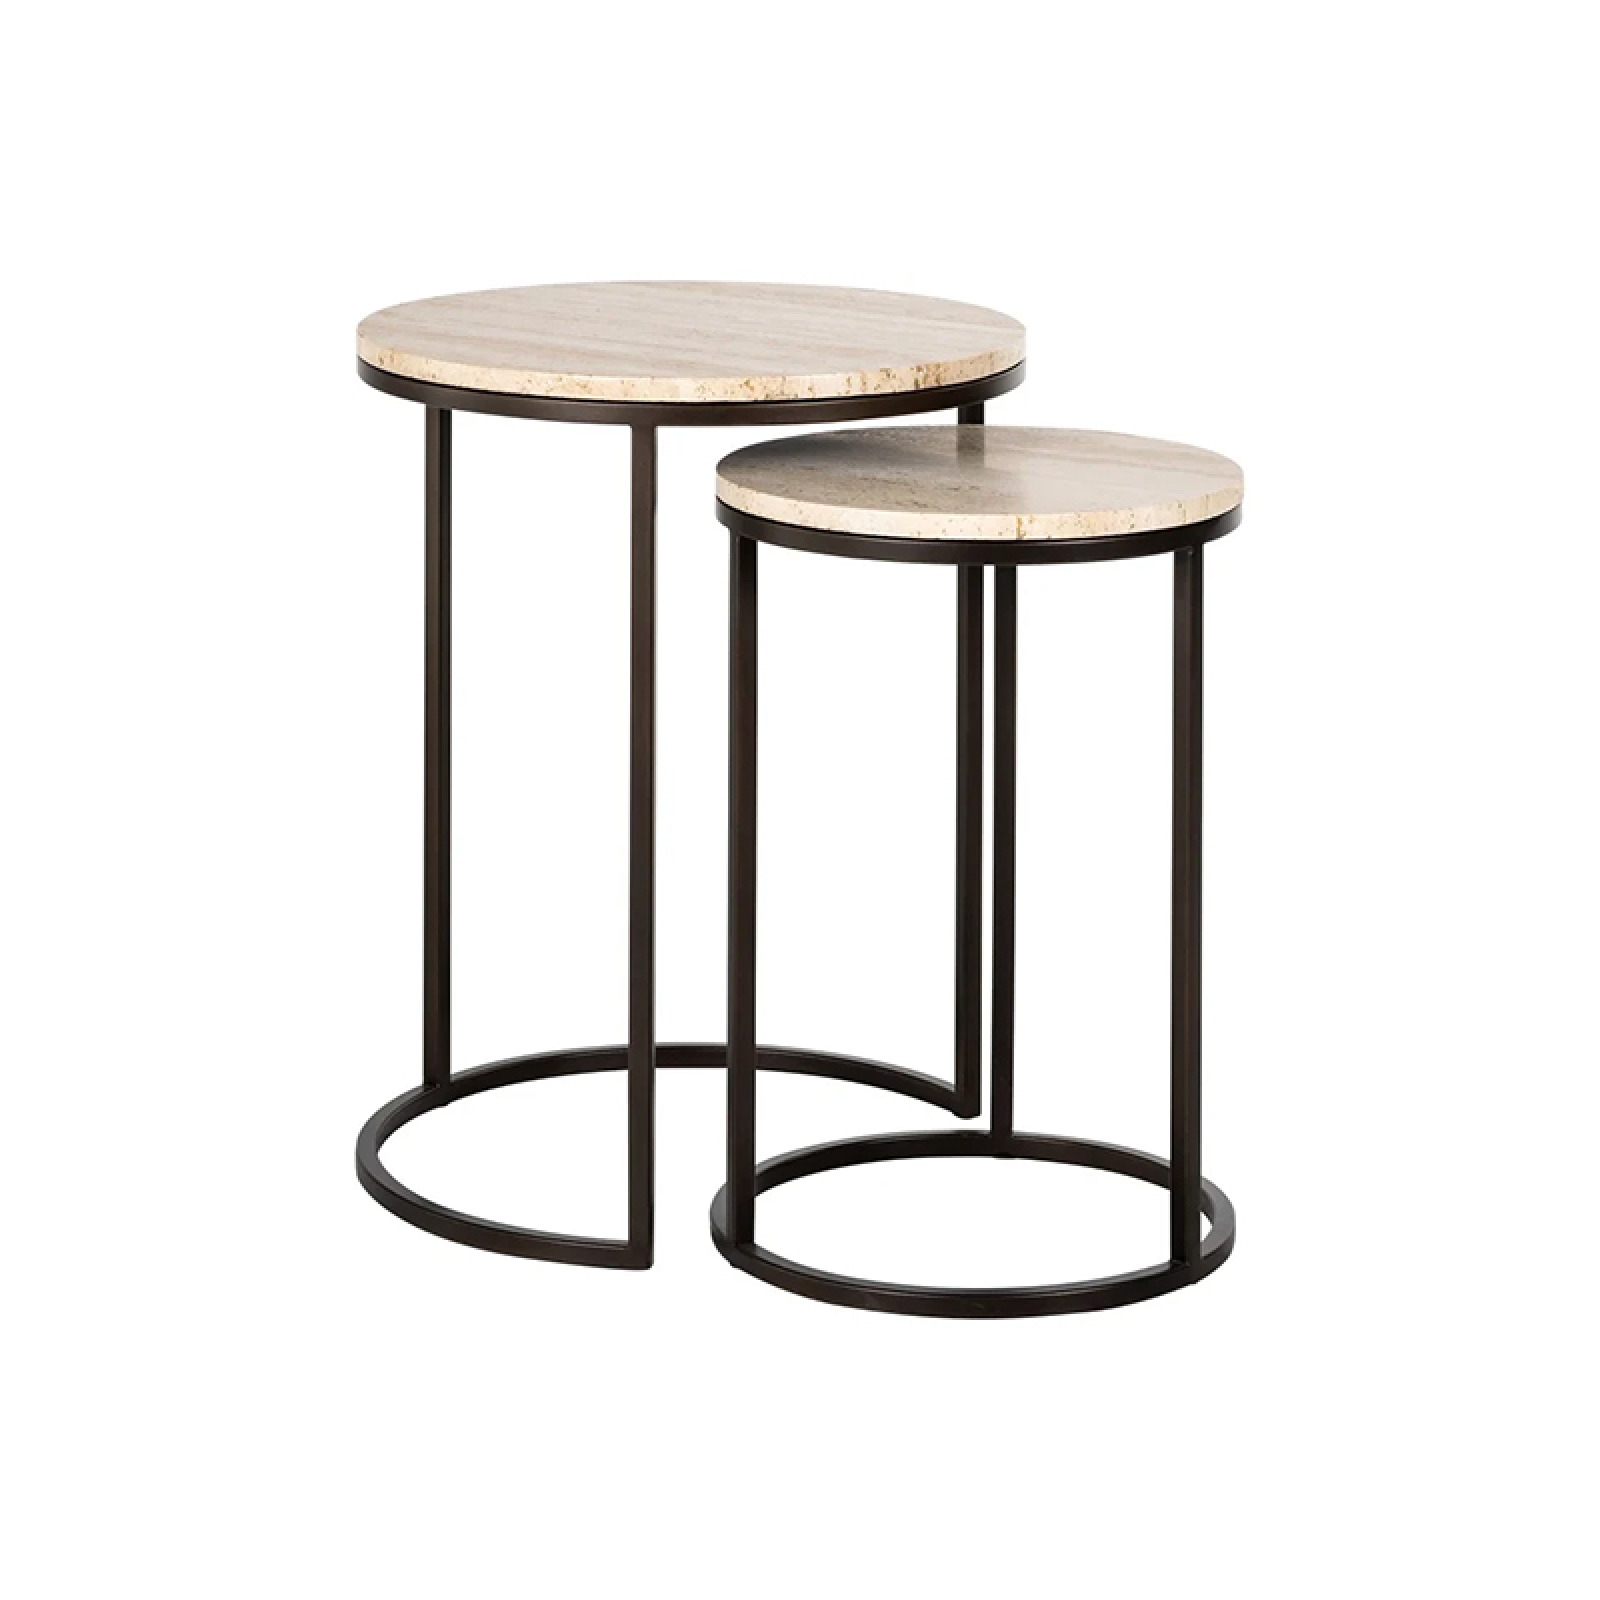 Avalon side table set of 2